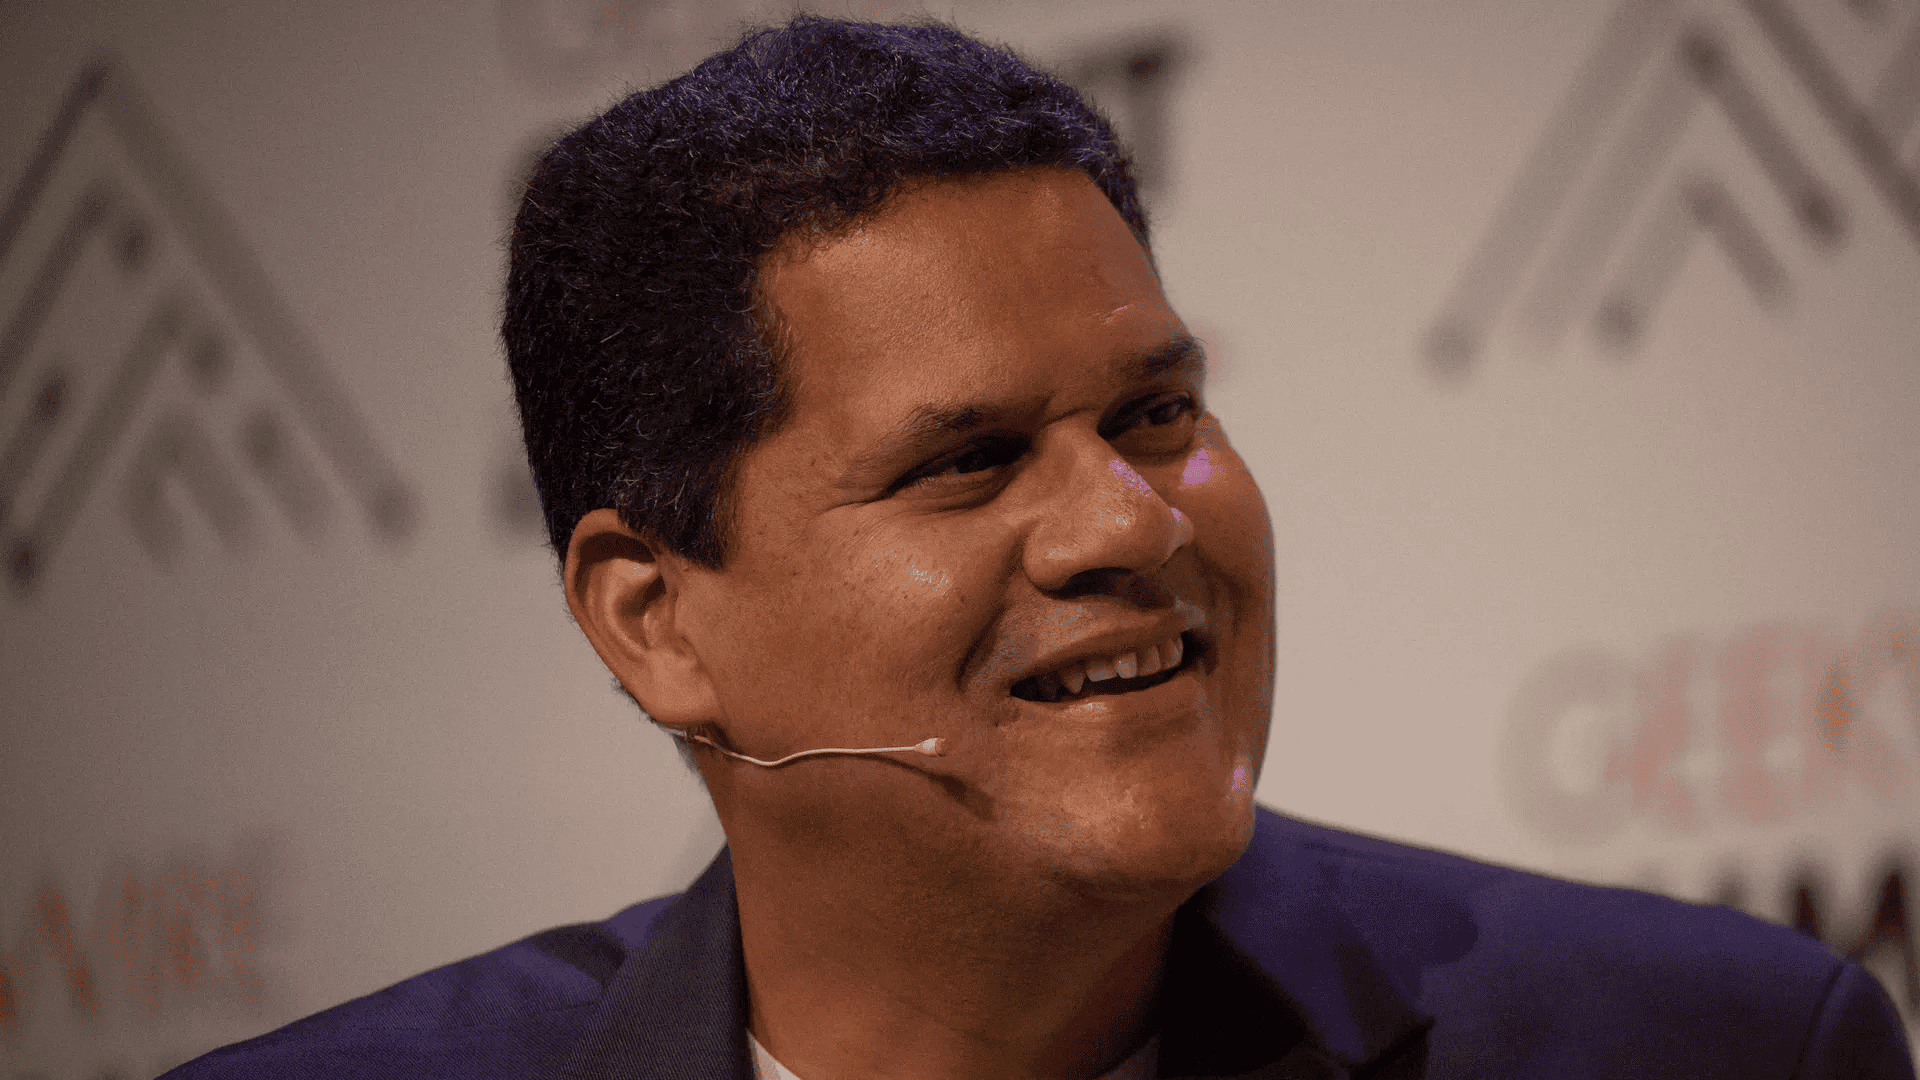 Reggie thinks Nintendo needs to add GameCube and Wii games to switch more than just a new mini console